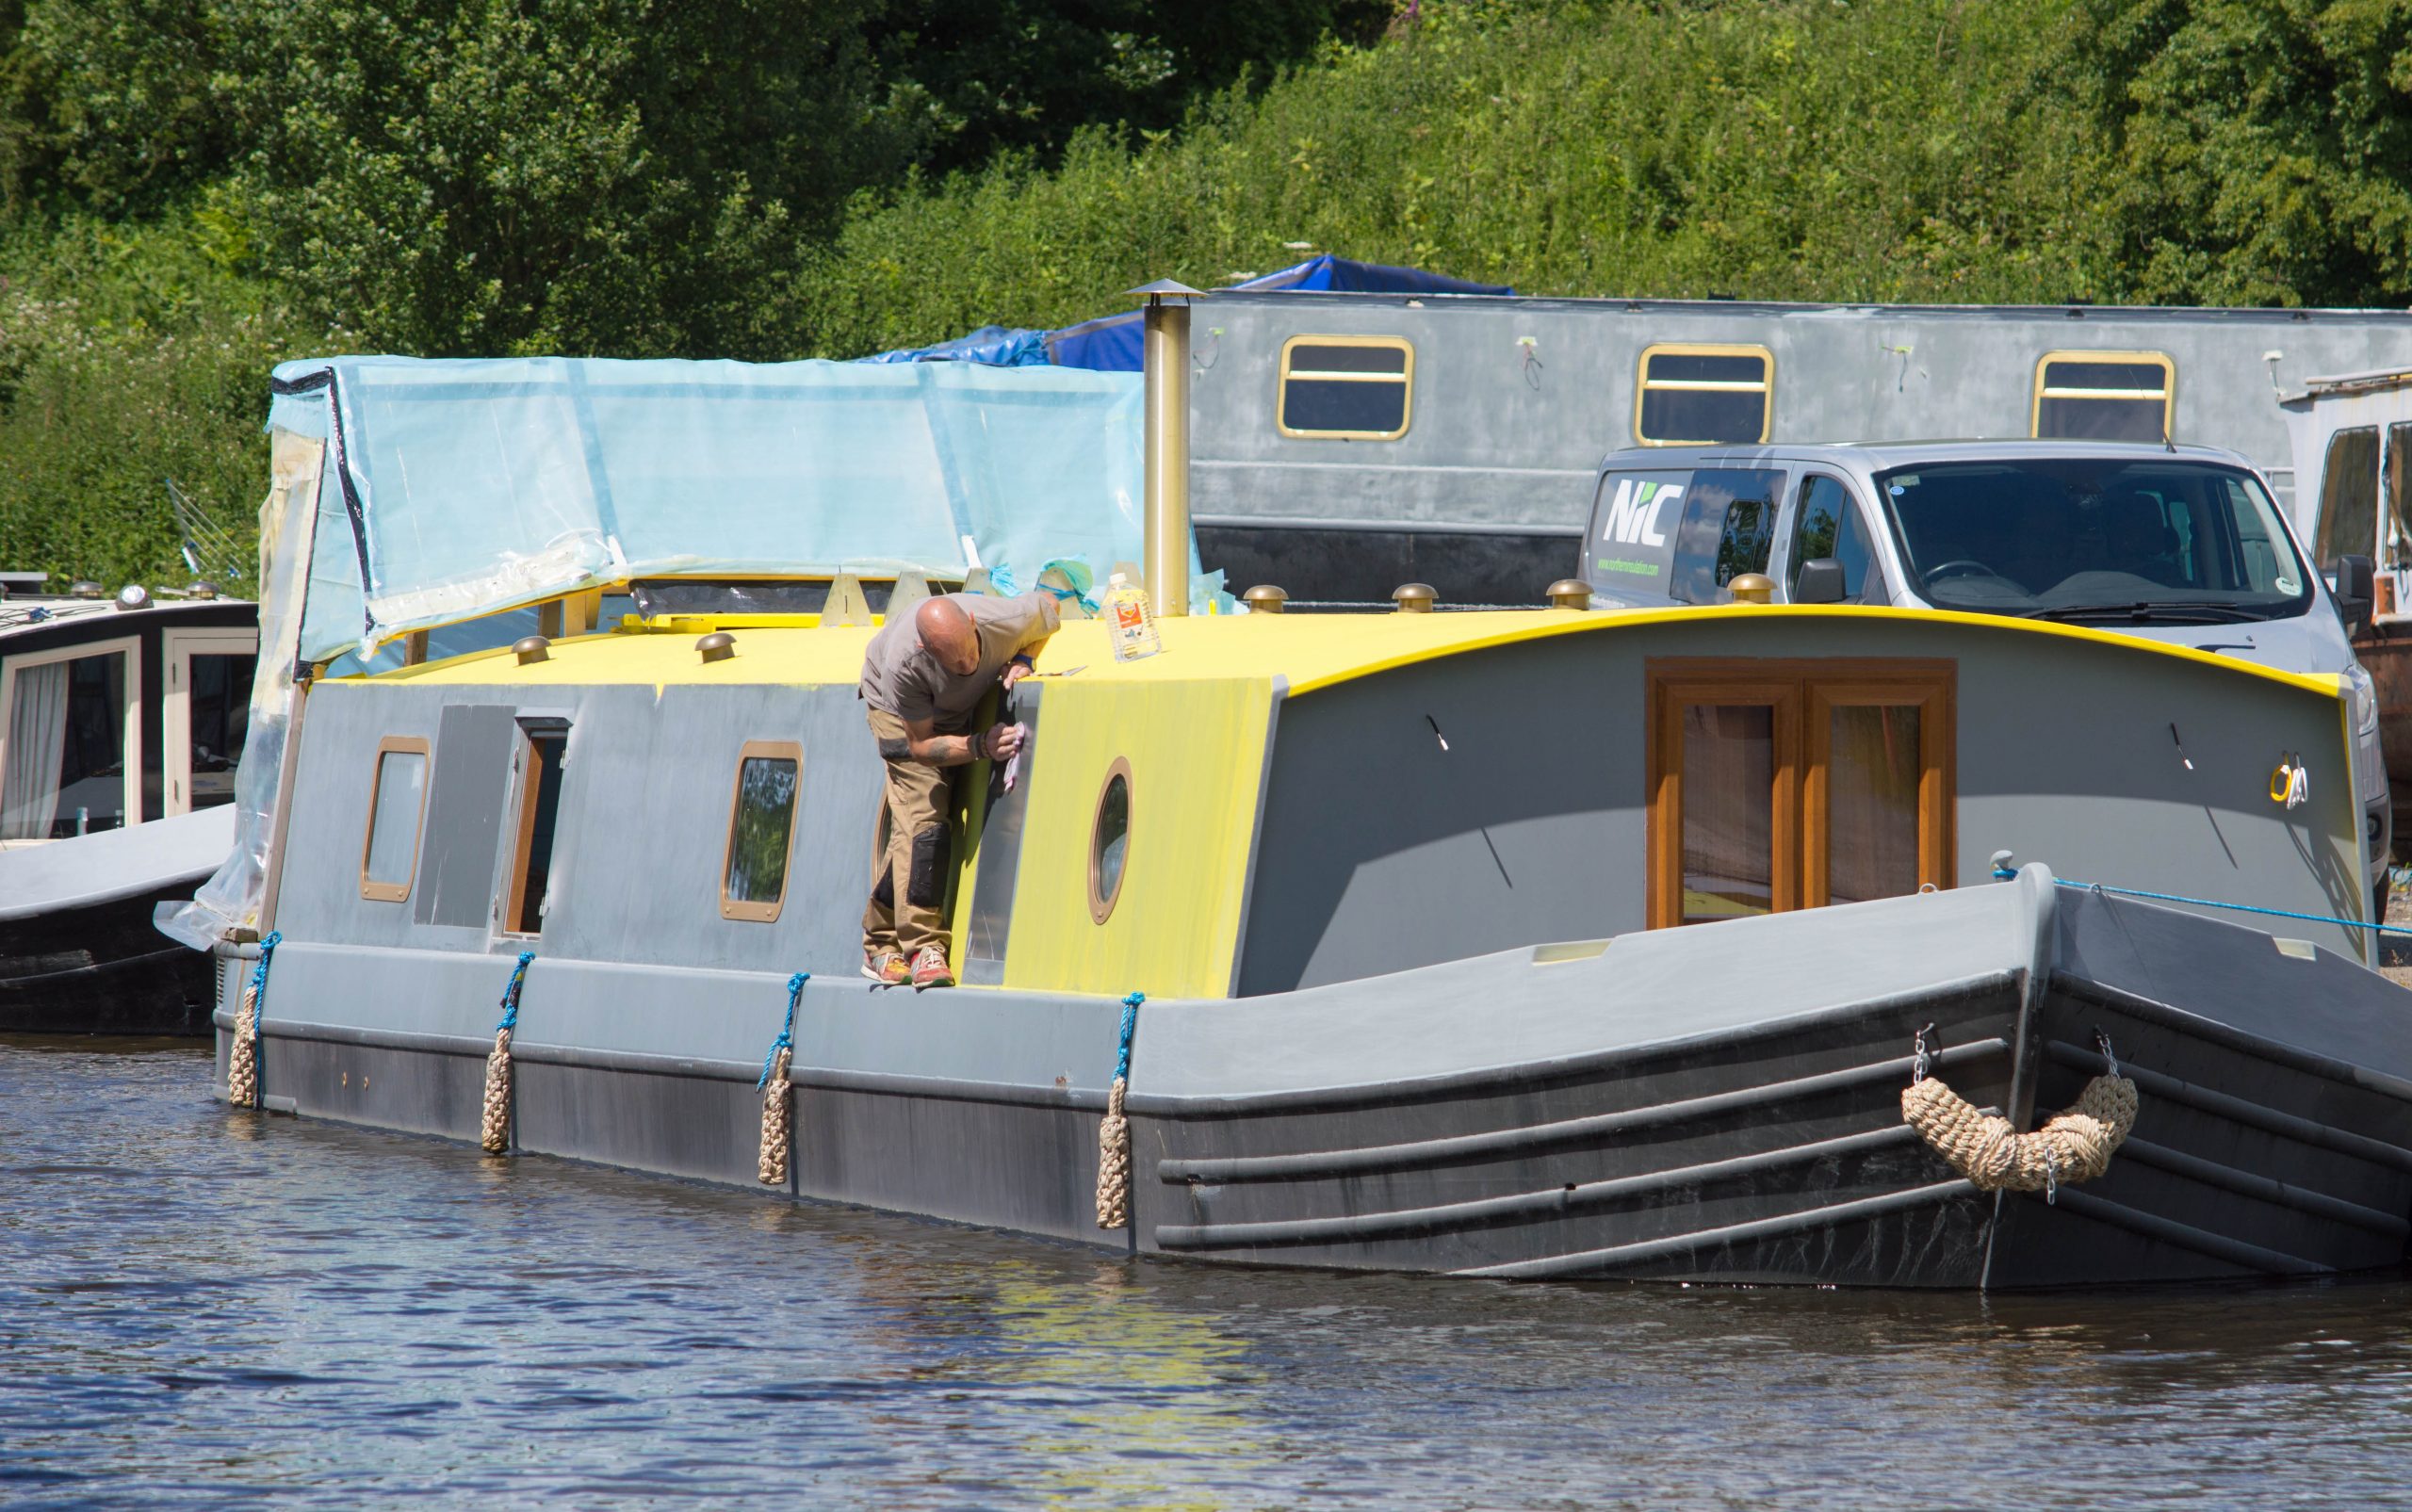 Painting a canal boat on the water